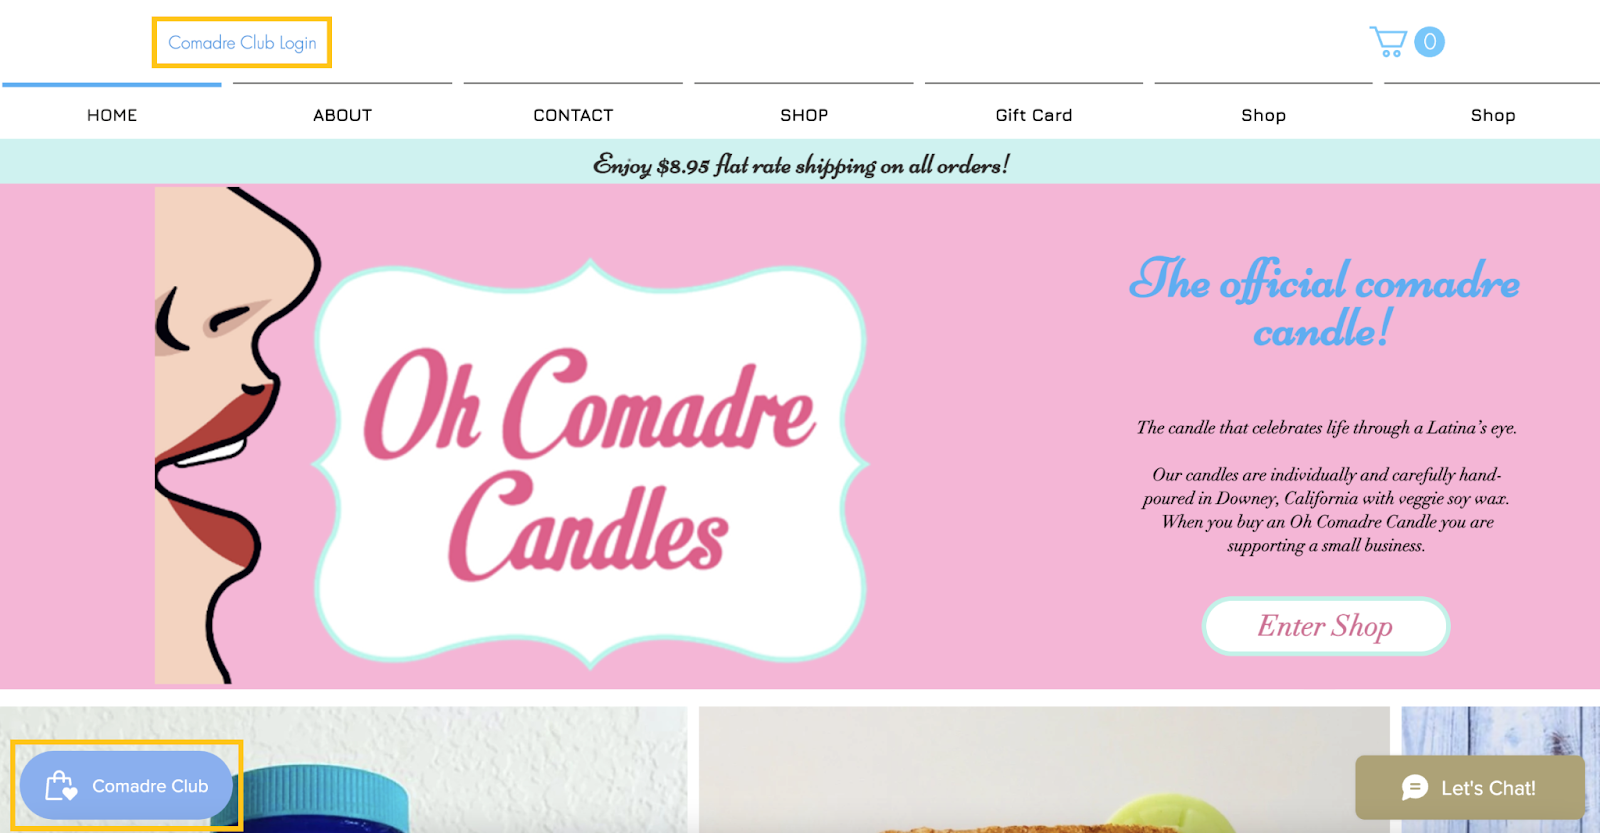  Rewards program for BFCM–A screenshot of Oh Comadre Candles’ homepage showing their loyalty program launcher and “Comadre Club Login” call to action.